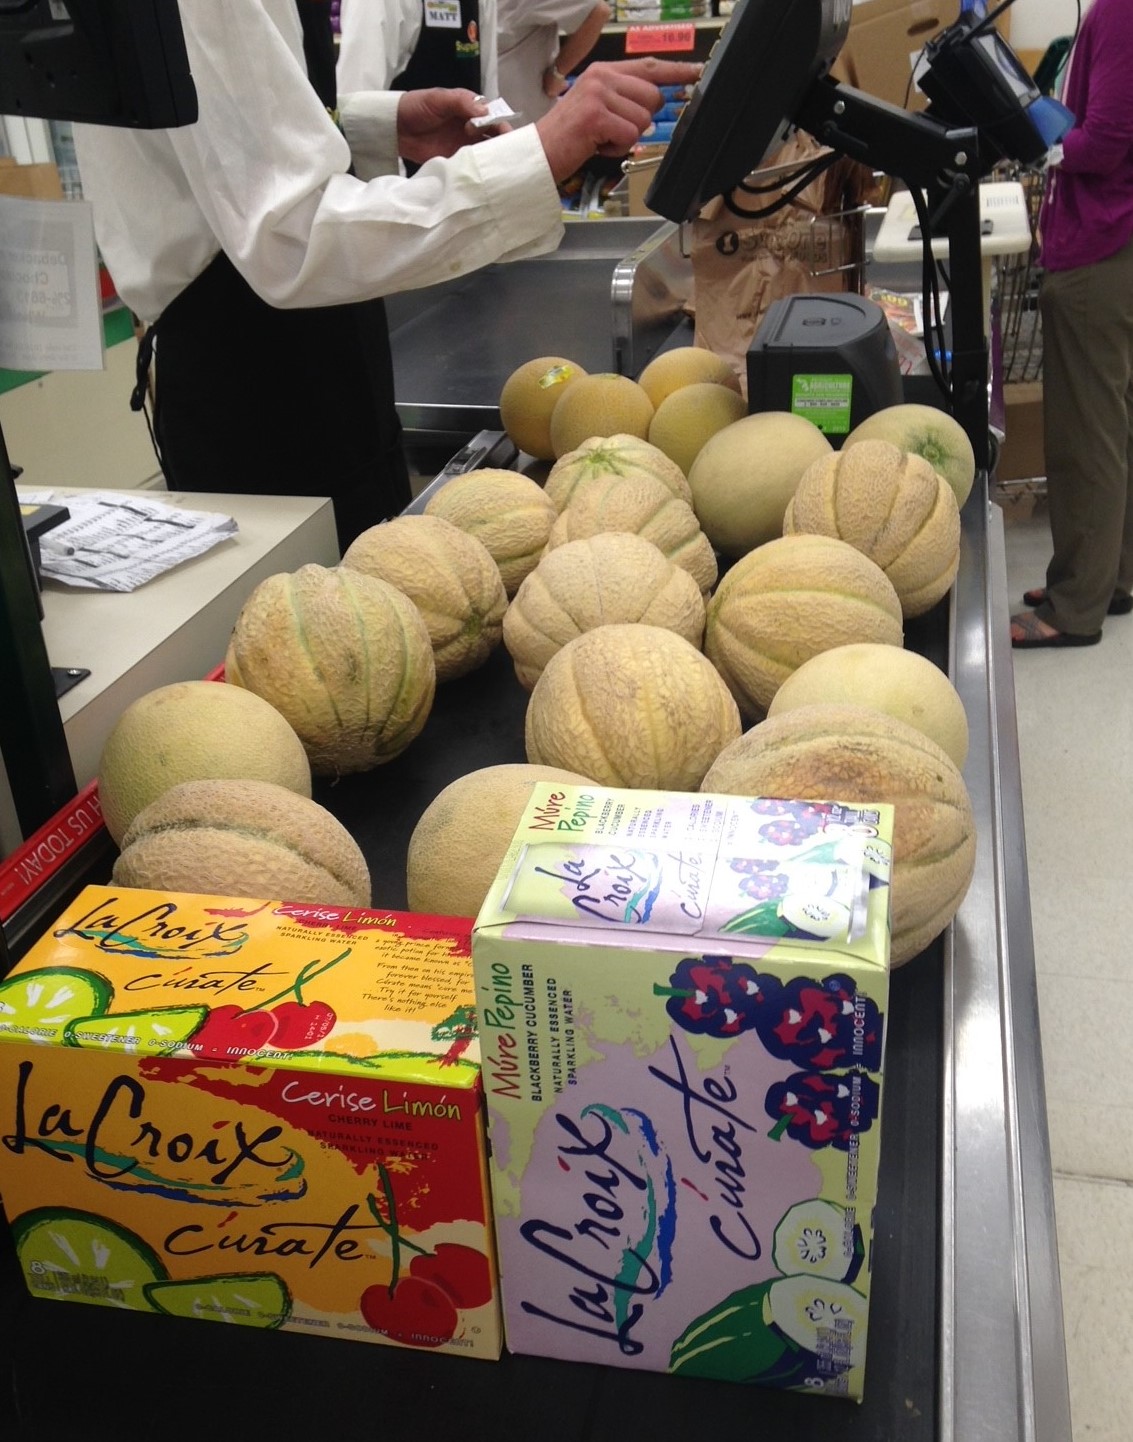 Melons in a checkout line at a grocery store